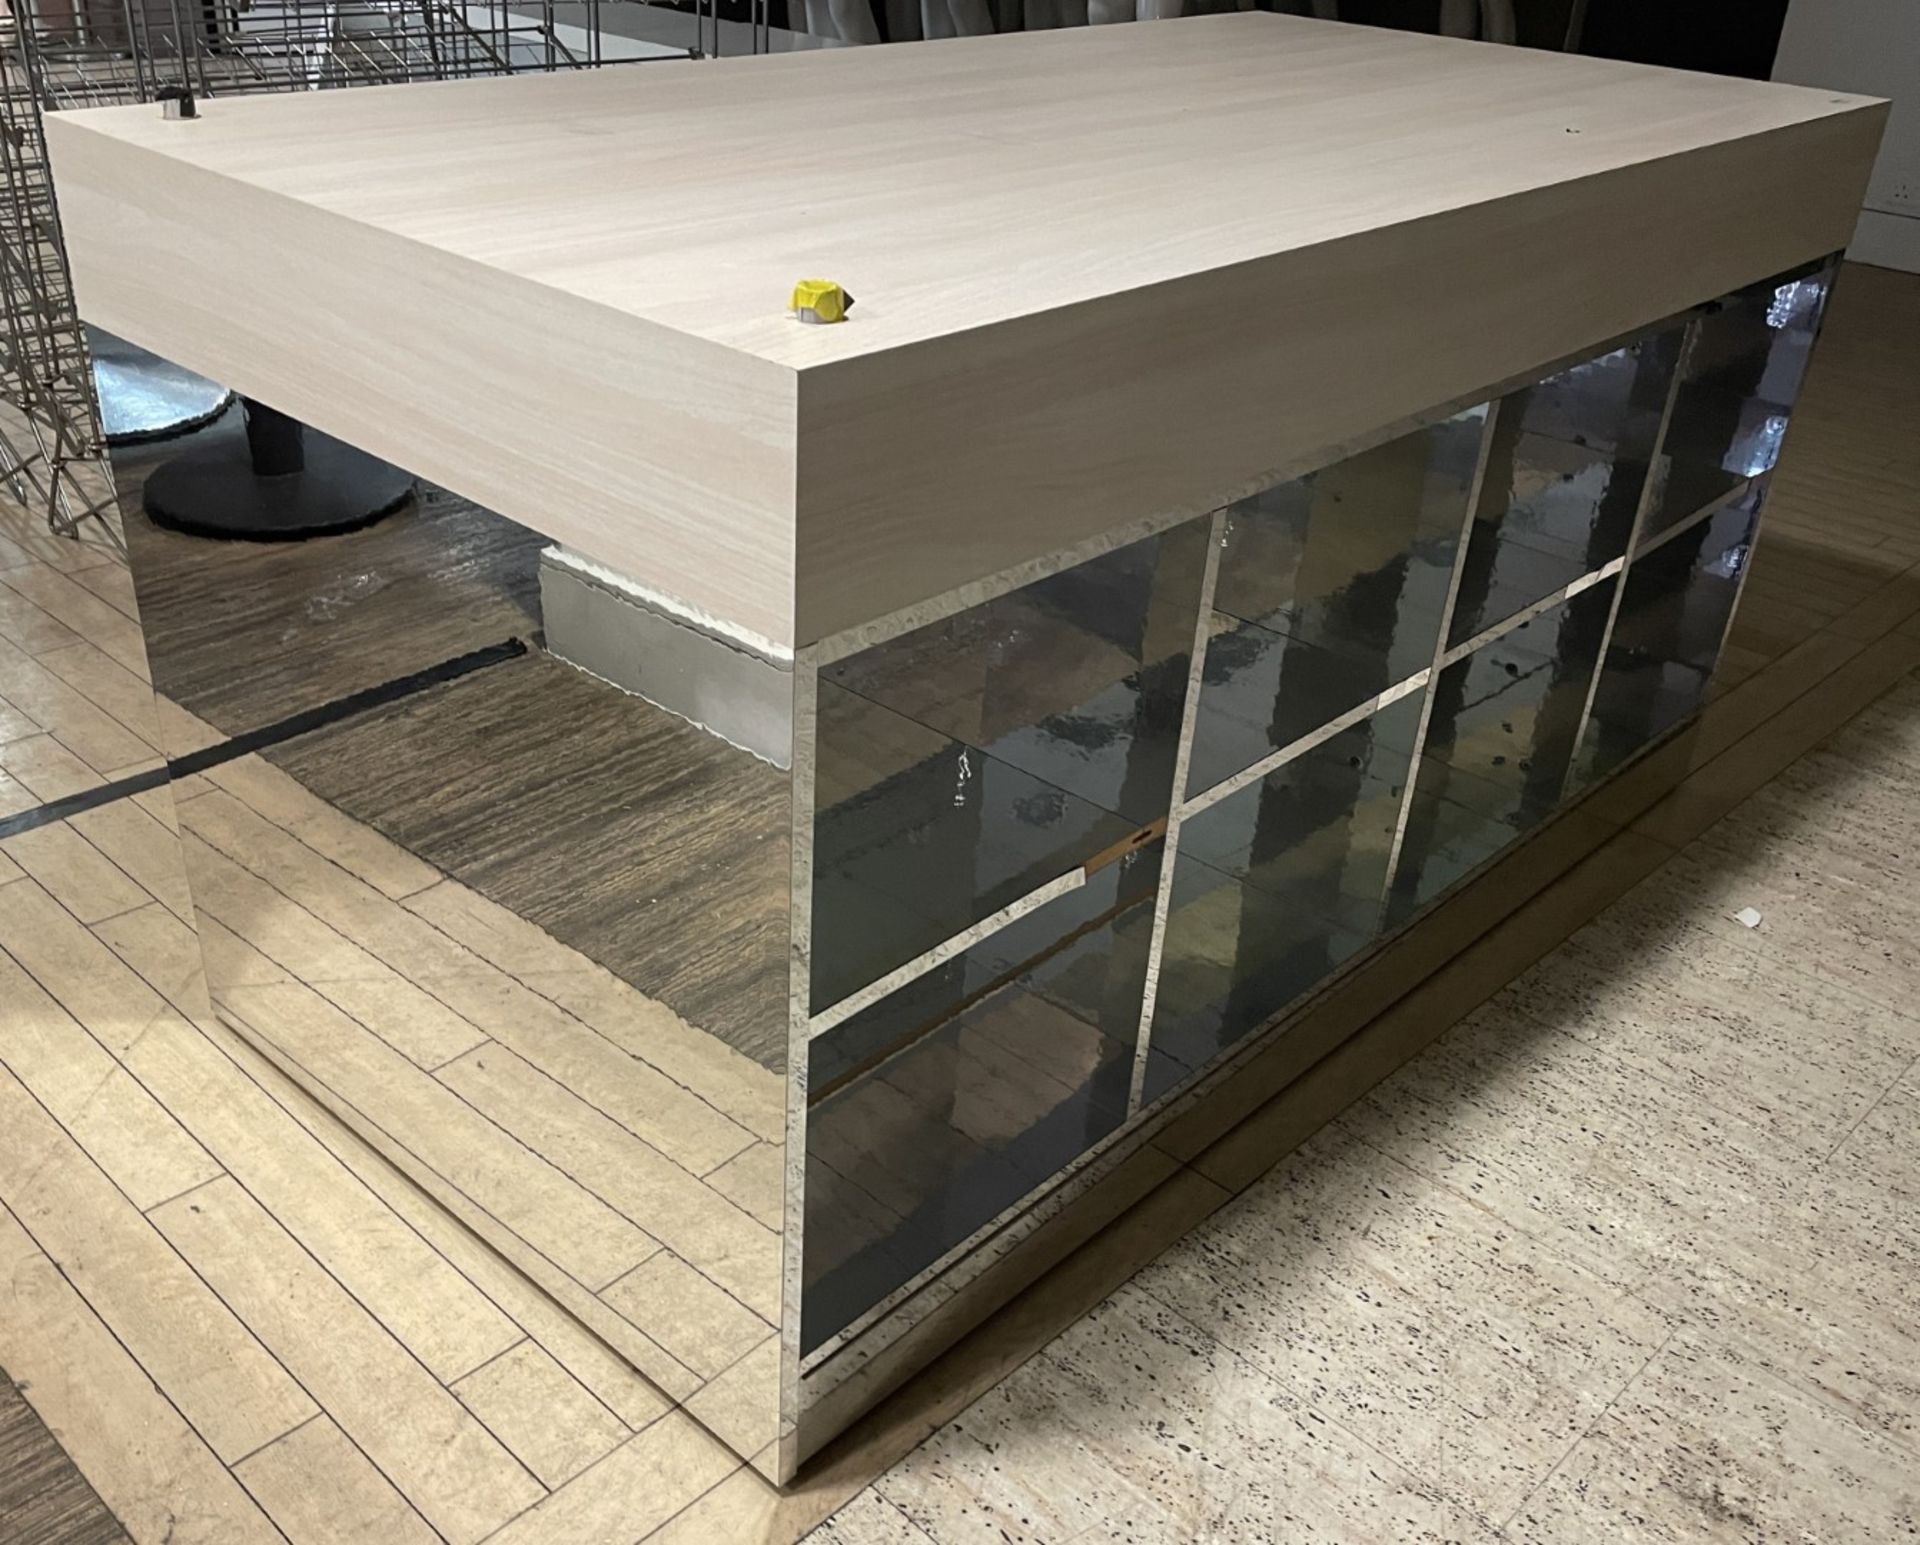 1 x Retail Display Island With Ash Wooden Top and Mirrored Side Shelves and Panels - Size 82 x - Image 4 of 6